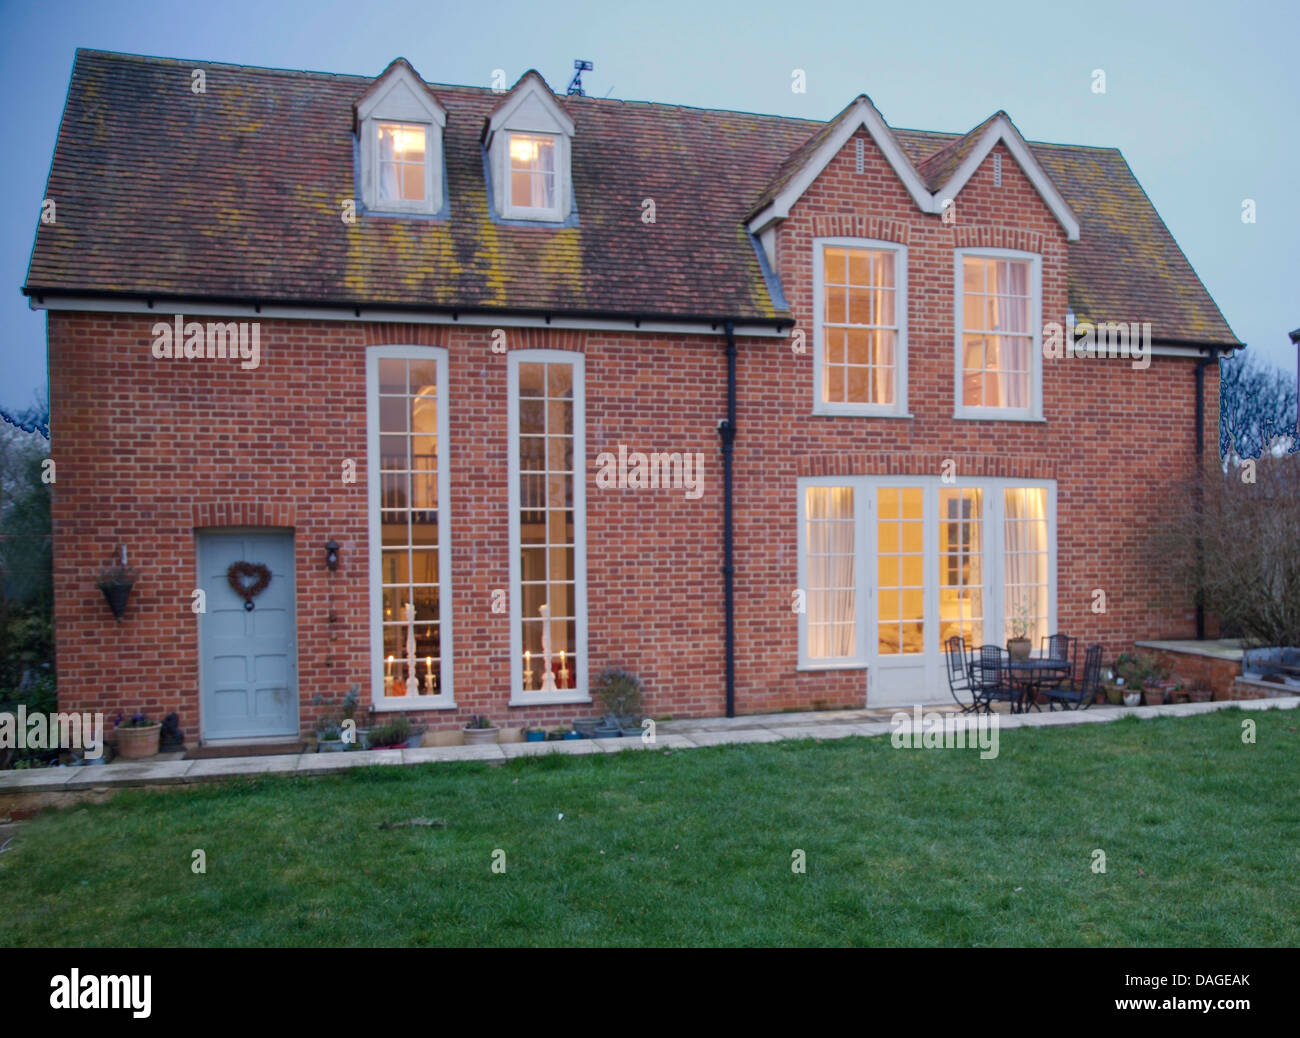 Exterior of brick built country house with tall, narrow windows beside blue front door, lit in early evening Stock Photo